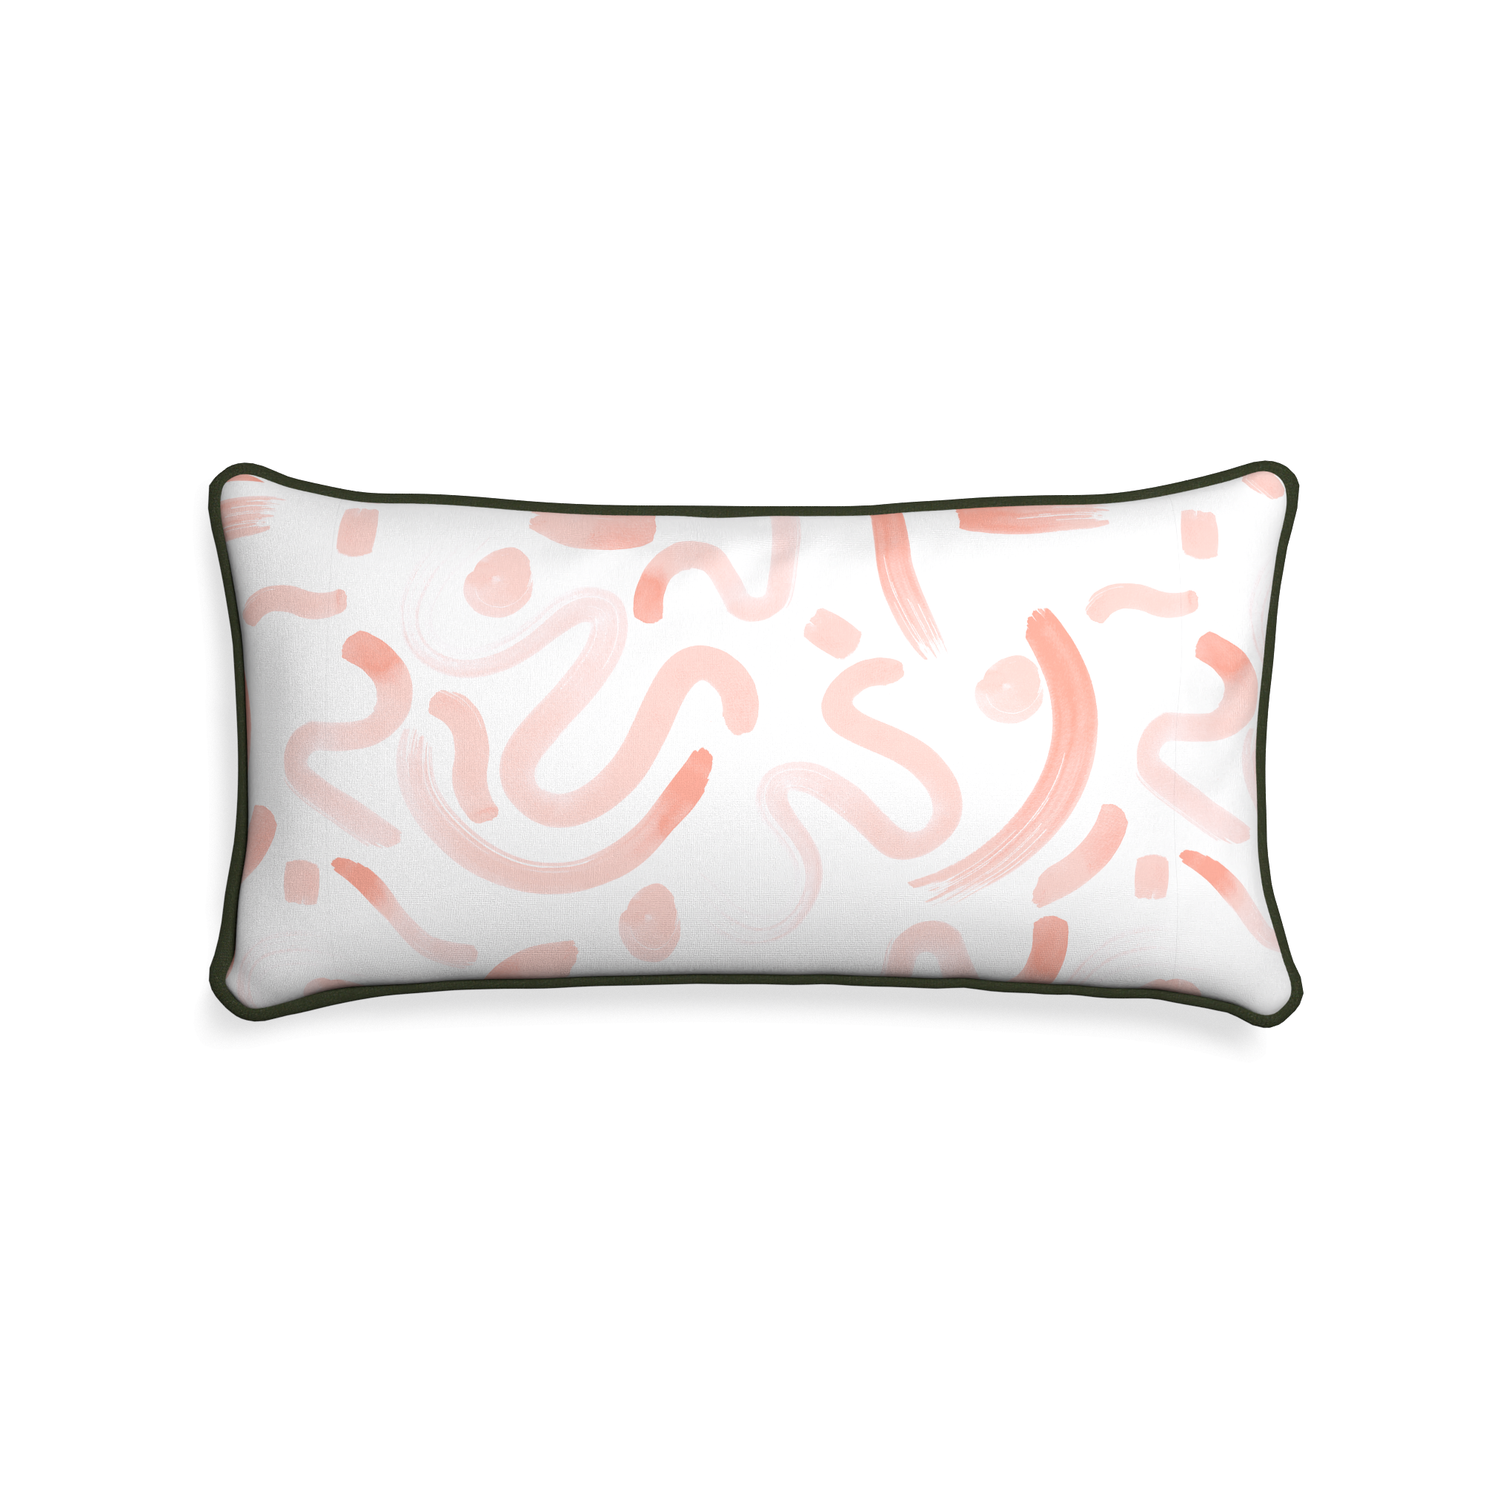 Midi-lumbar hockney pink custom pink graphicpillow with f piping on white background